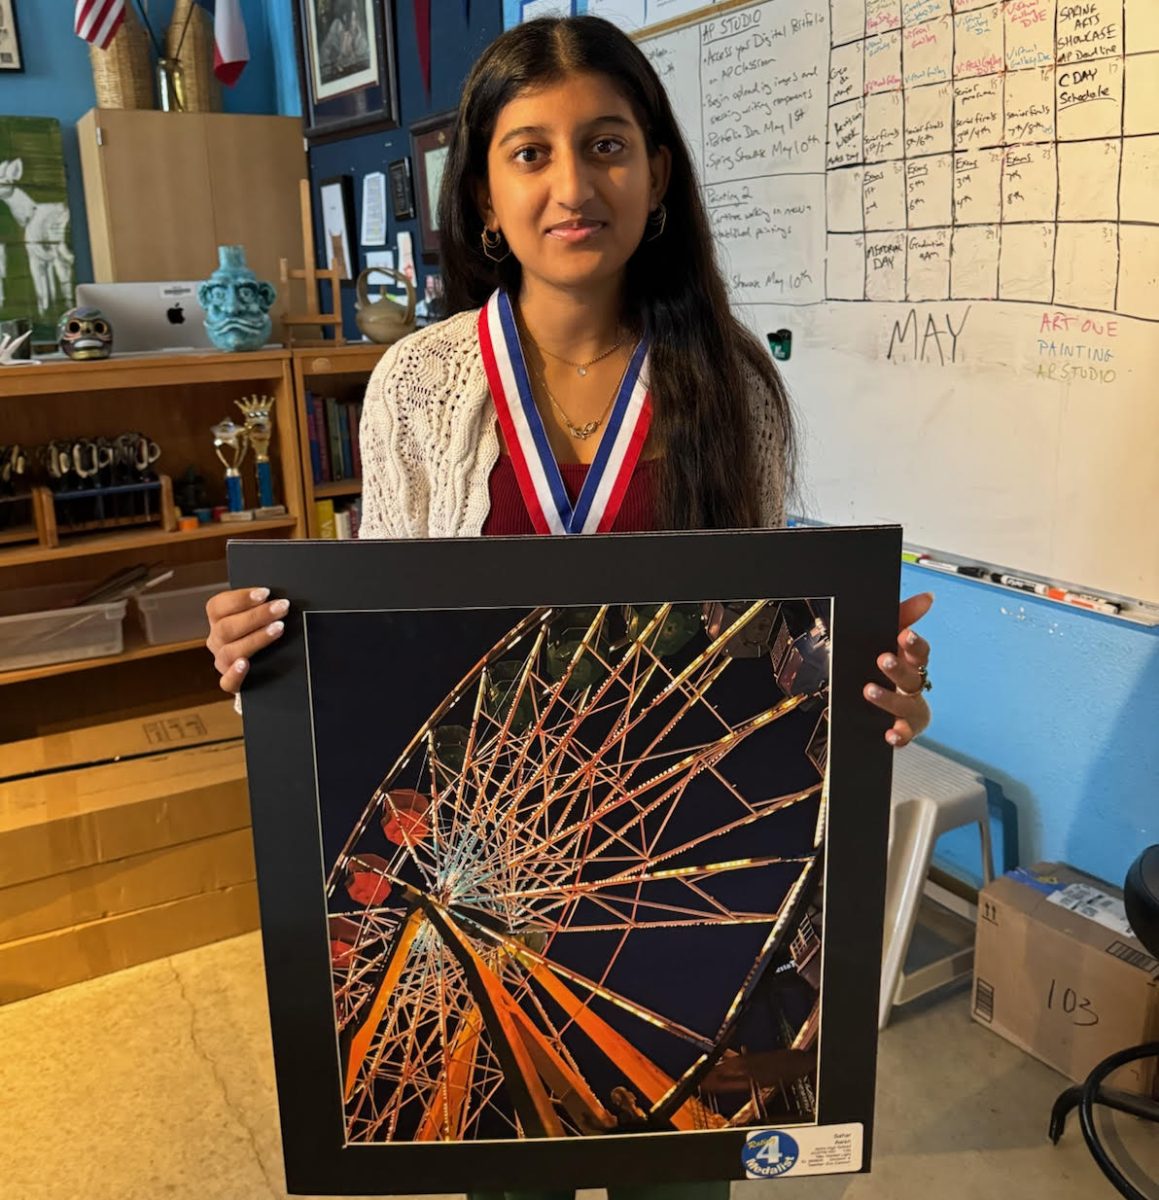 Sahar+Awan+with+her+winning+art+and+her+State+medal+with+a+score+of+4%21